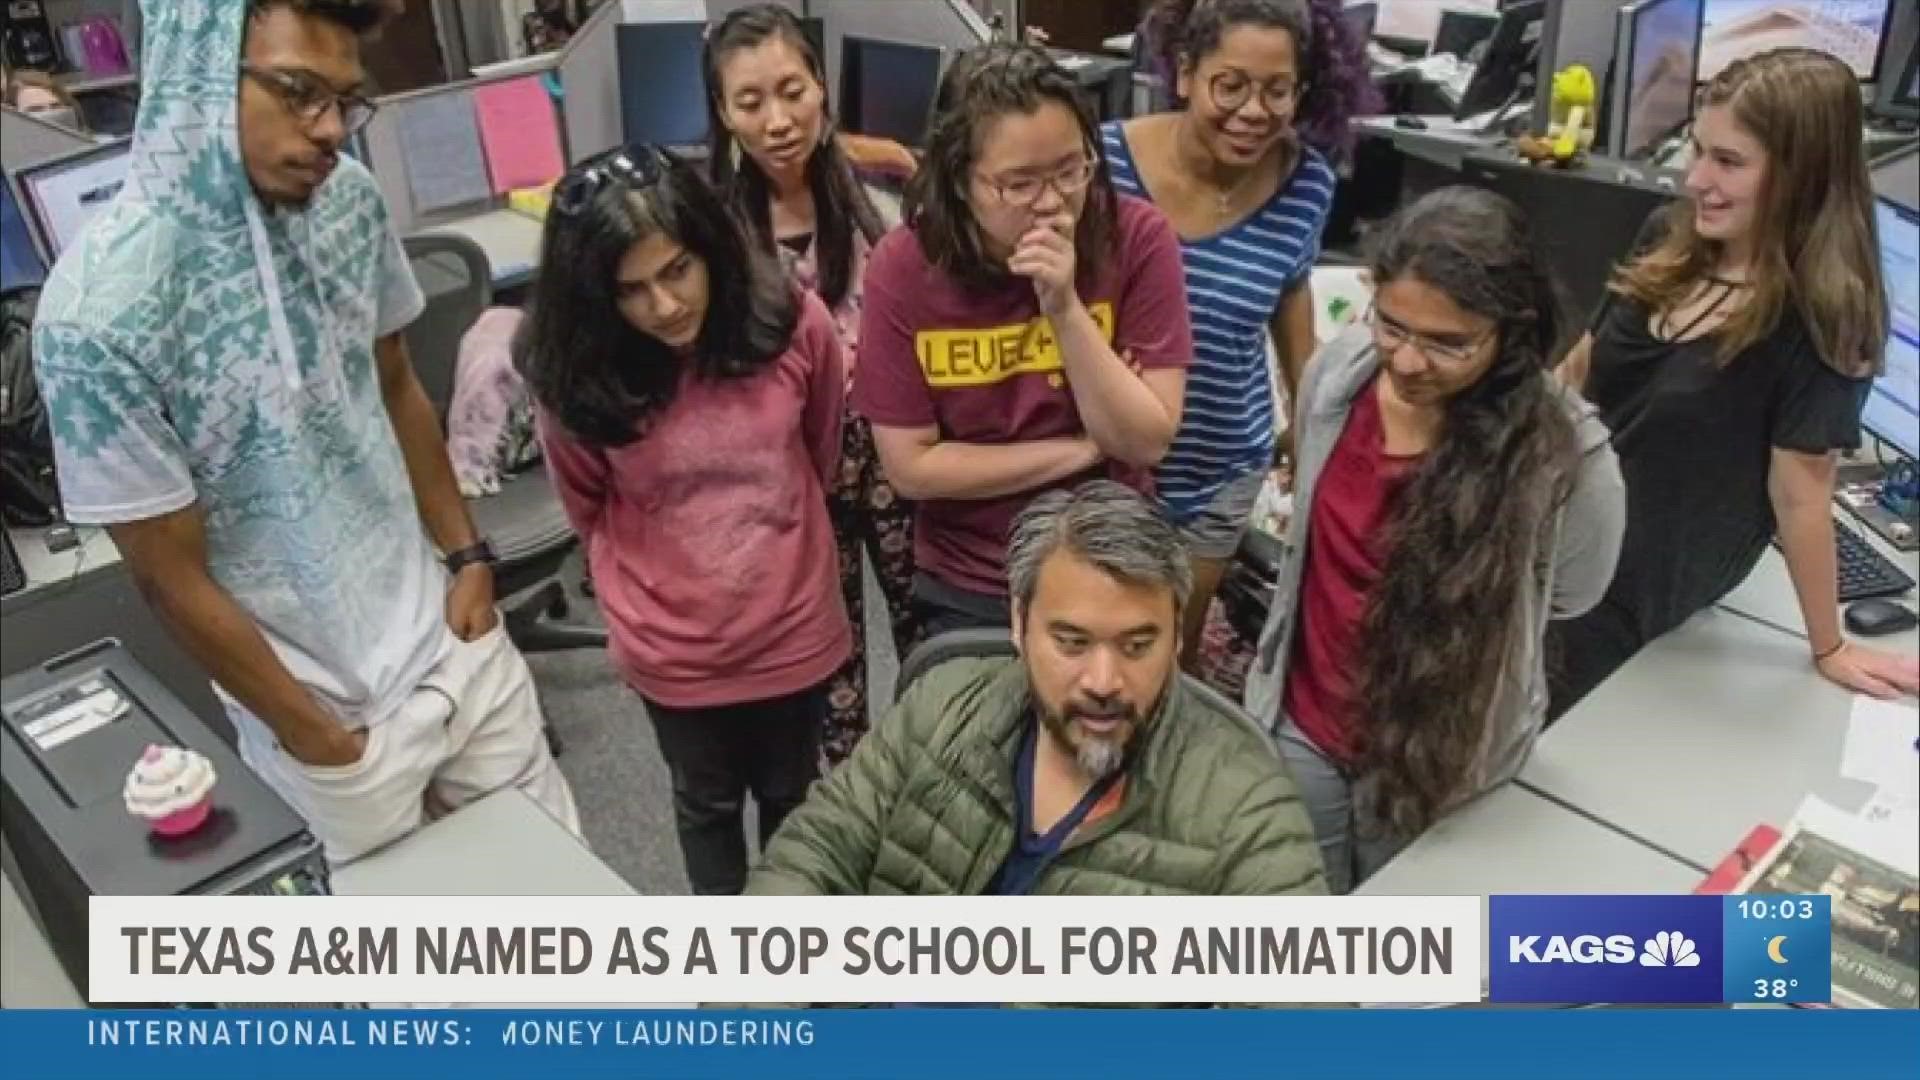 Texas A&M recently named a top school nationally for animation 